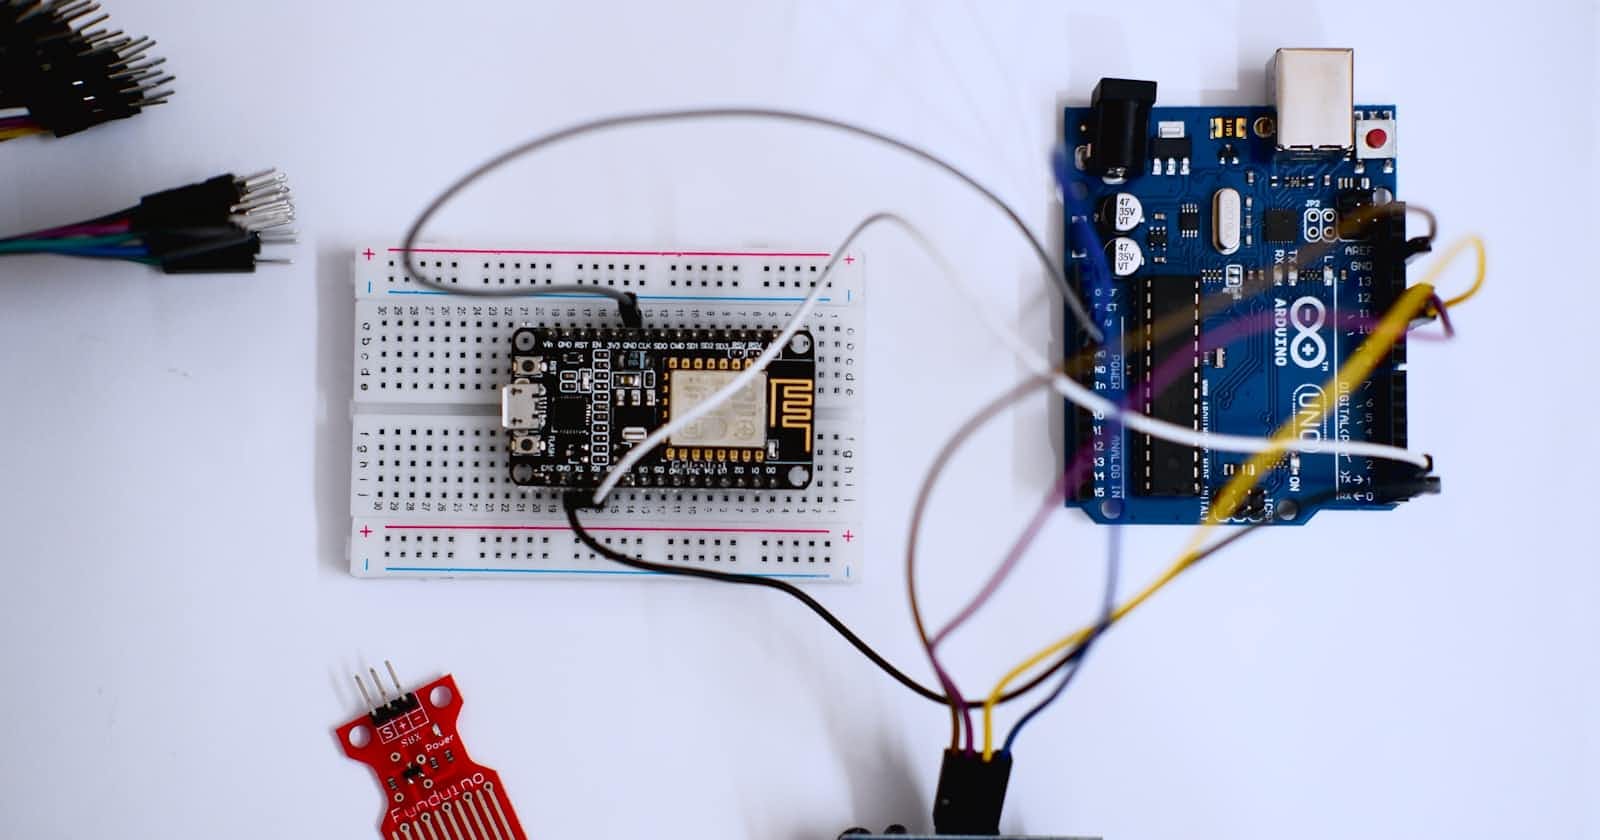 Building a Web-Controlled Lamp with ESP32 (MCU support Wifi)